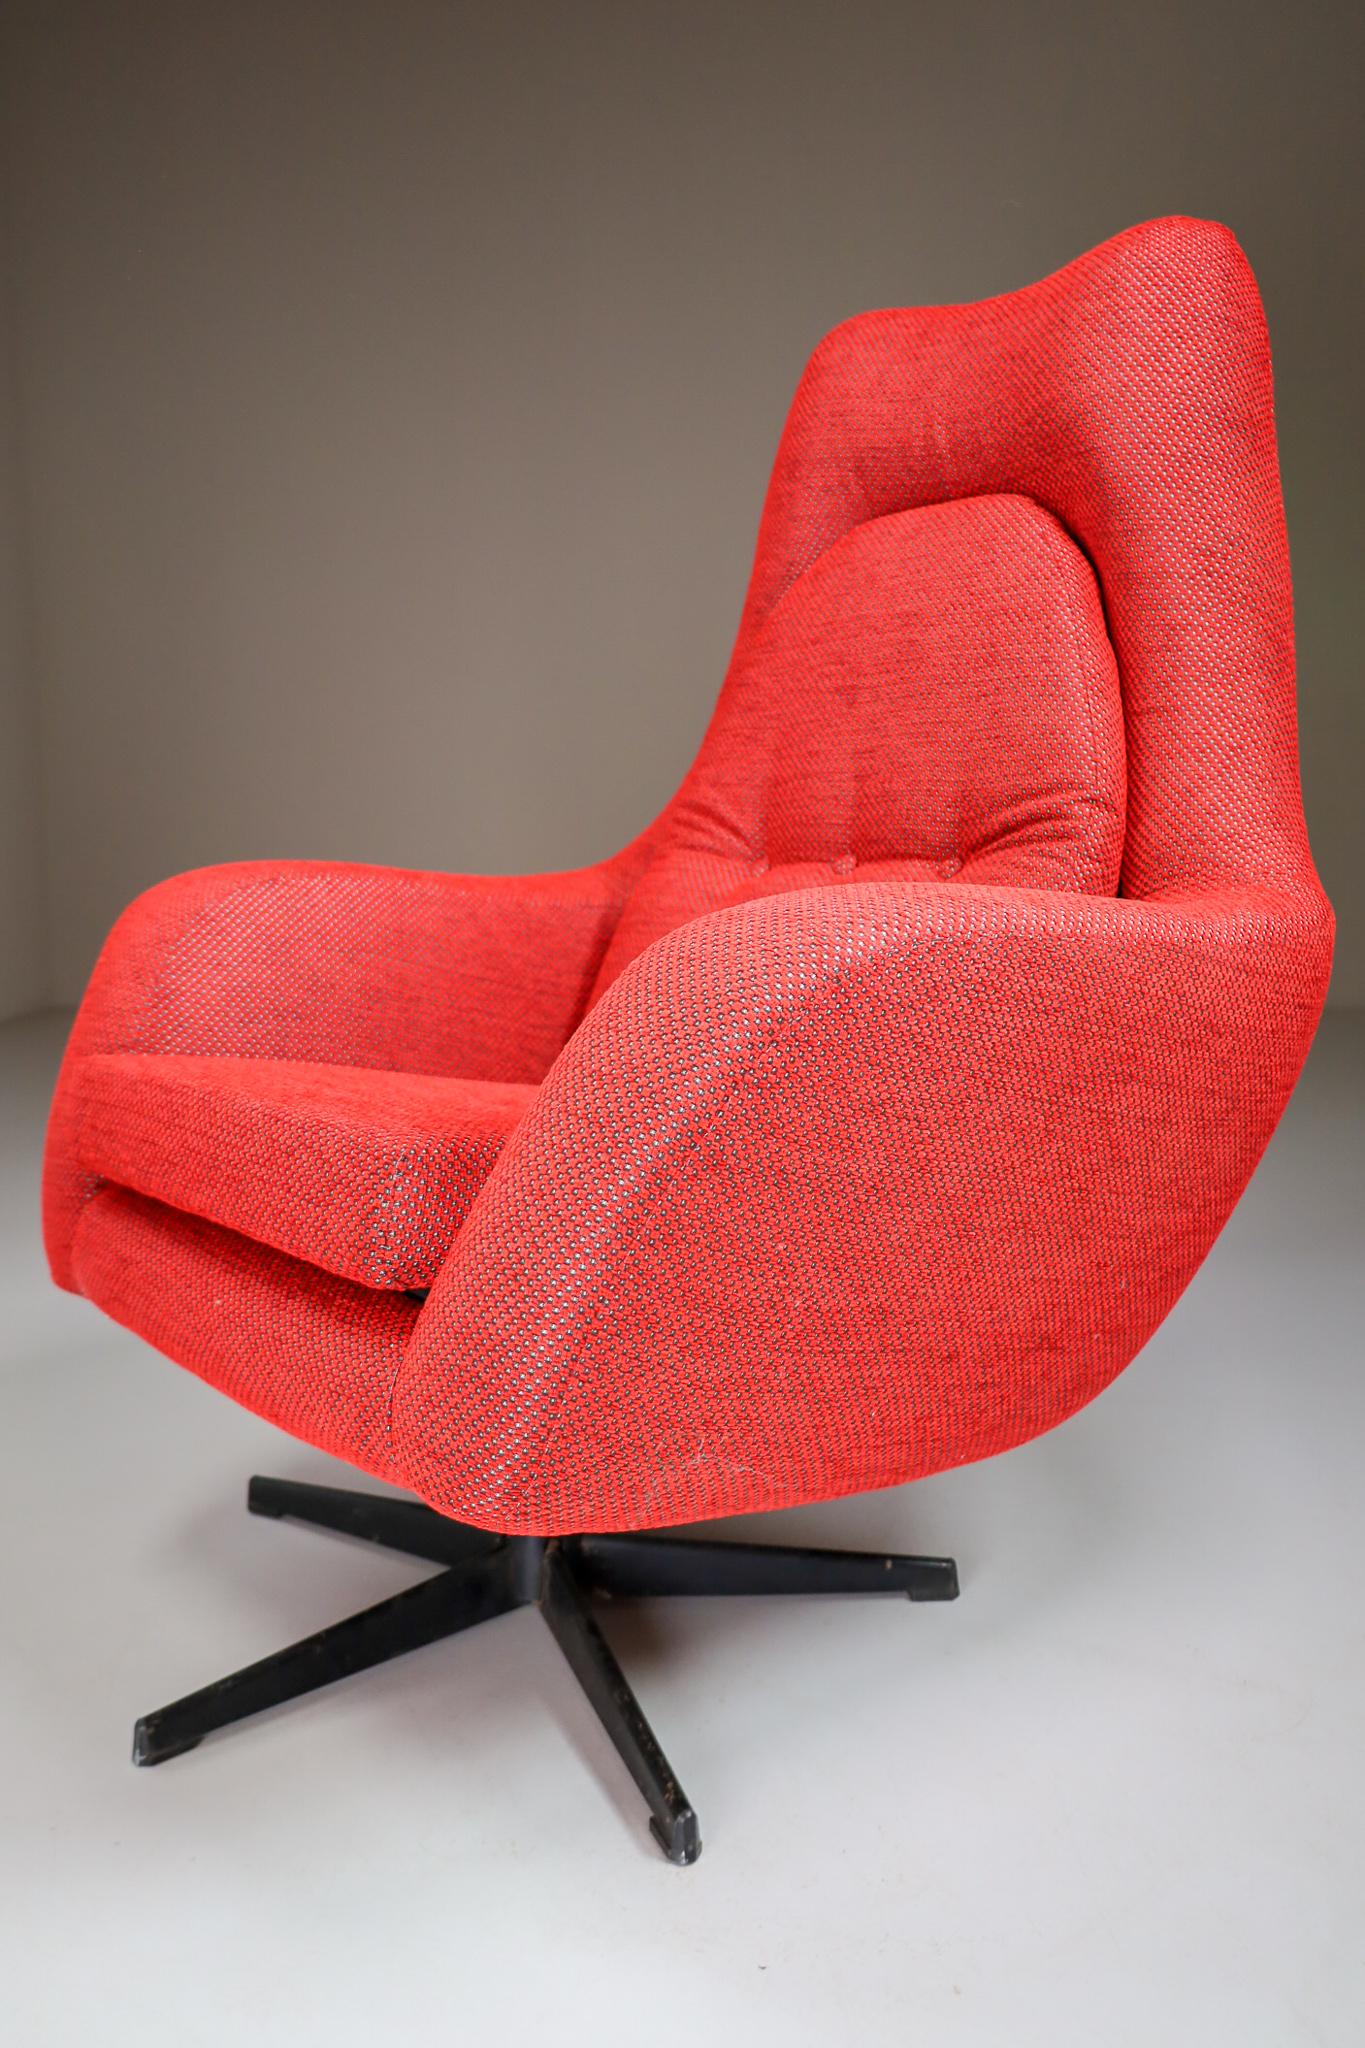 Pair of Swivel Chairs in New Reupholstered Red Fabric, Czech Republic 1970 For Sale 5